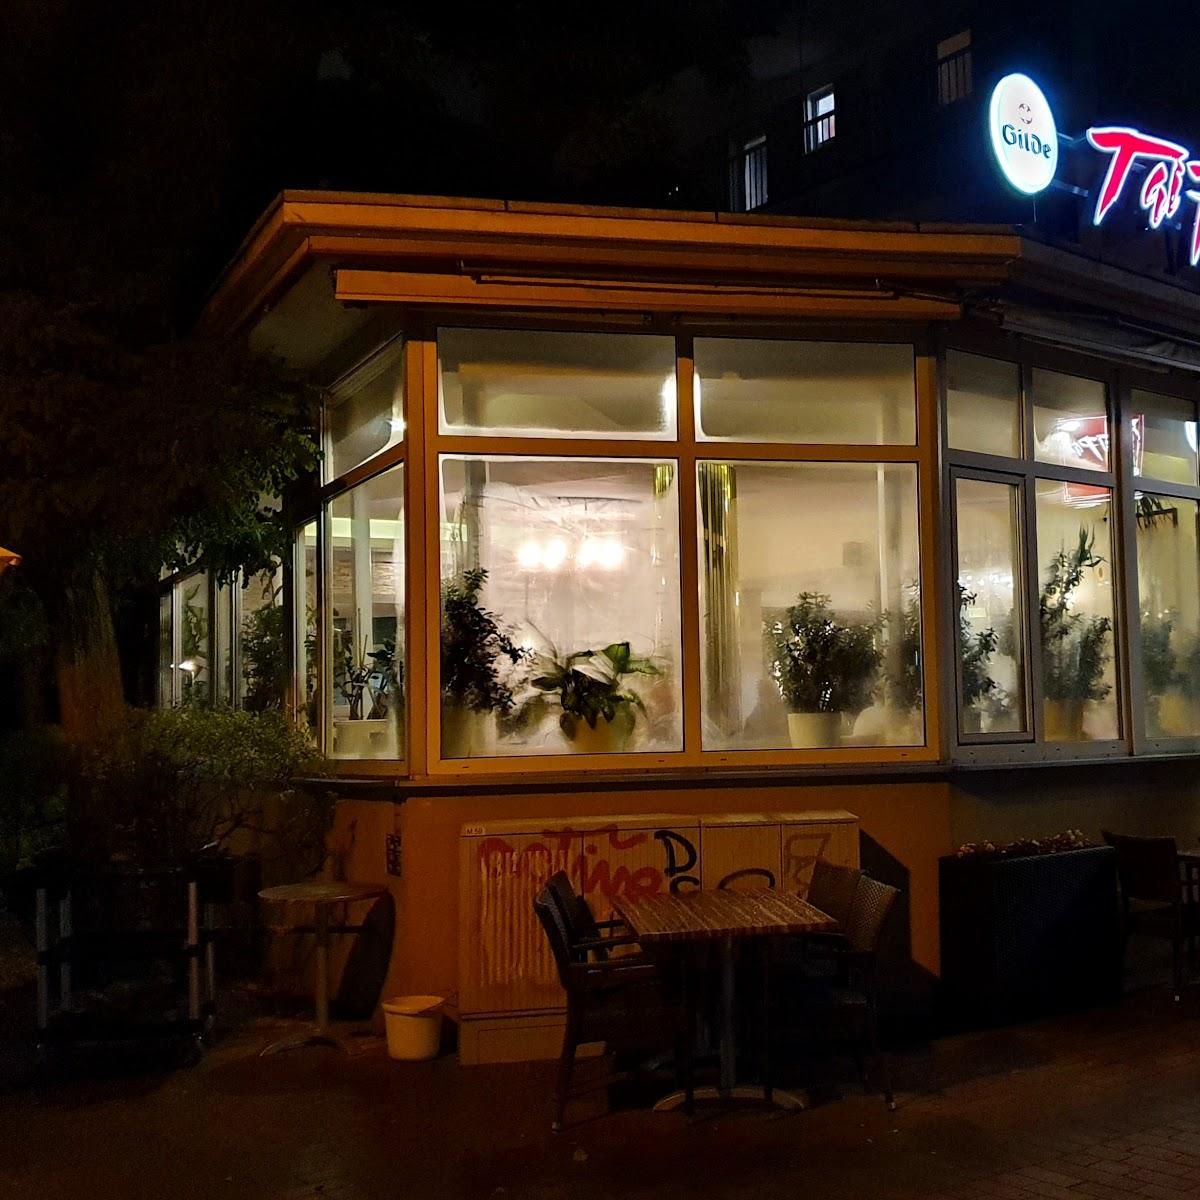 Restaurant "Tai-Pai" in Hannover